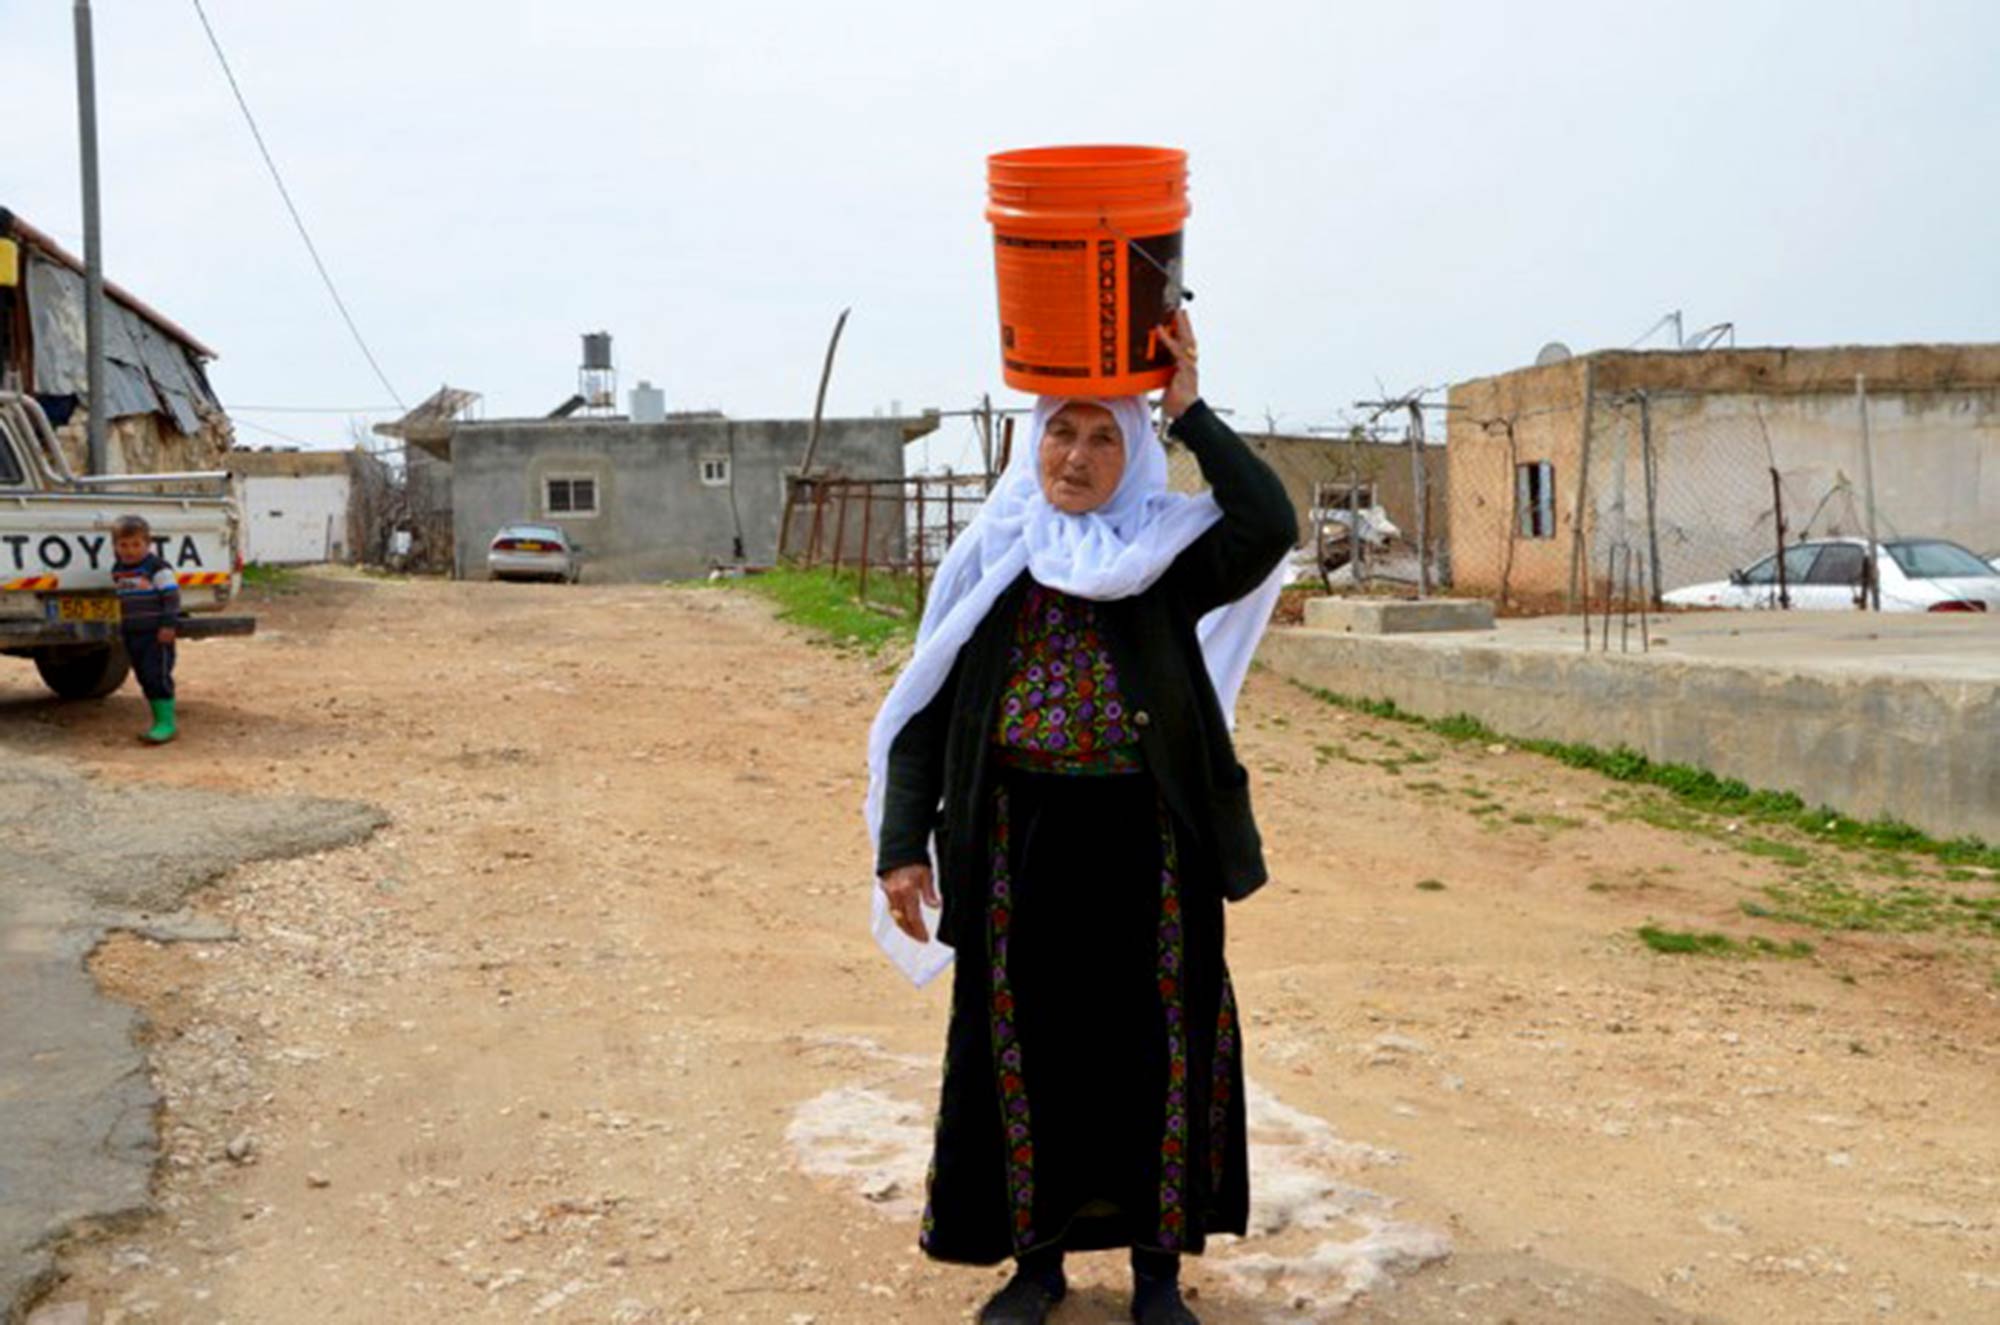 “Water is the backbone of my life,” says Hajje Fatmeh. At 80, she is still active as a cattle herder. Fatmeh lives in Imneizel, a Bedouin community in Area C. The remote village had no water network until the PCID program built a water tank and installed water pipes and house connections. For most of her life she would walk for an hour every other day to the village well and carry back five buckets of water – “four on the donkey and one on top of my head!” “Having [water] in your home is a blessing of incalculable worth!,” Hajje Fatmeh reminds us.